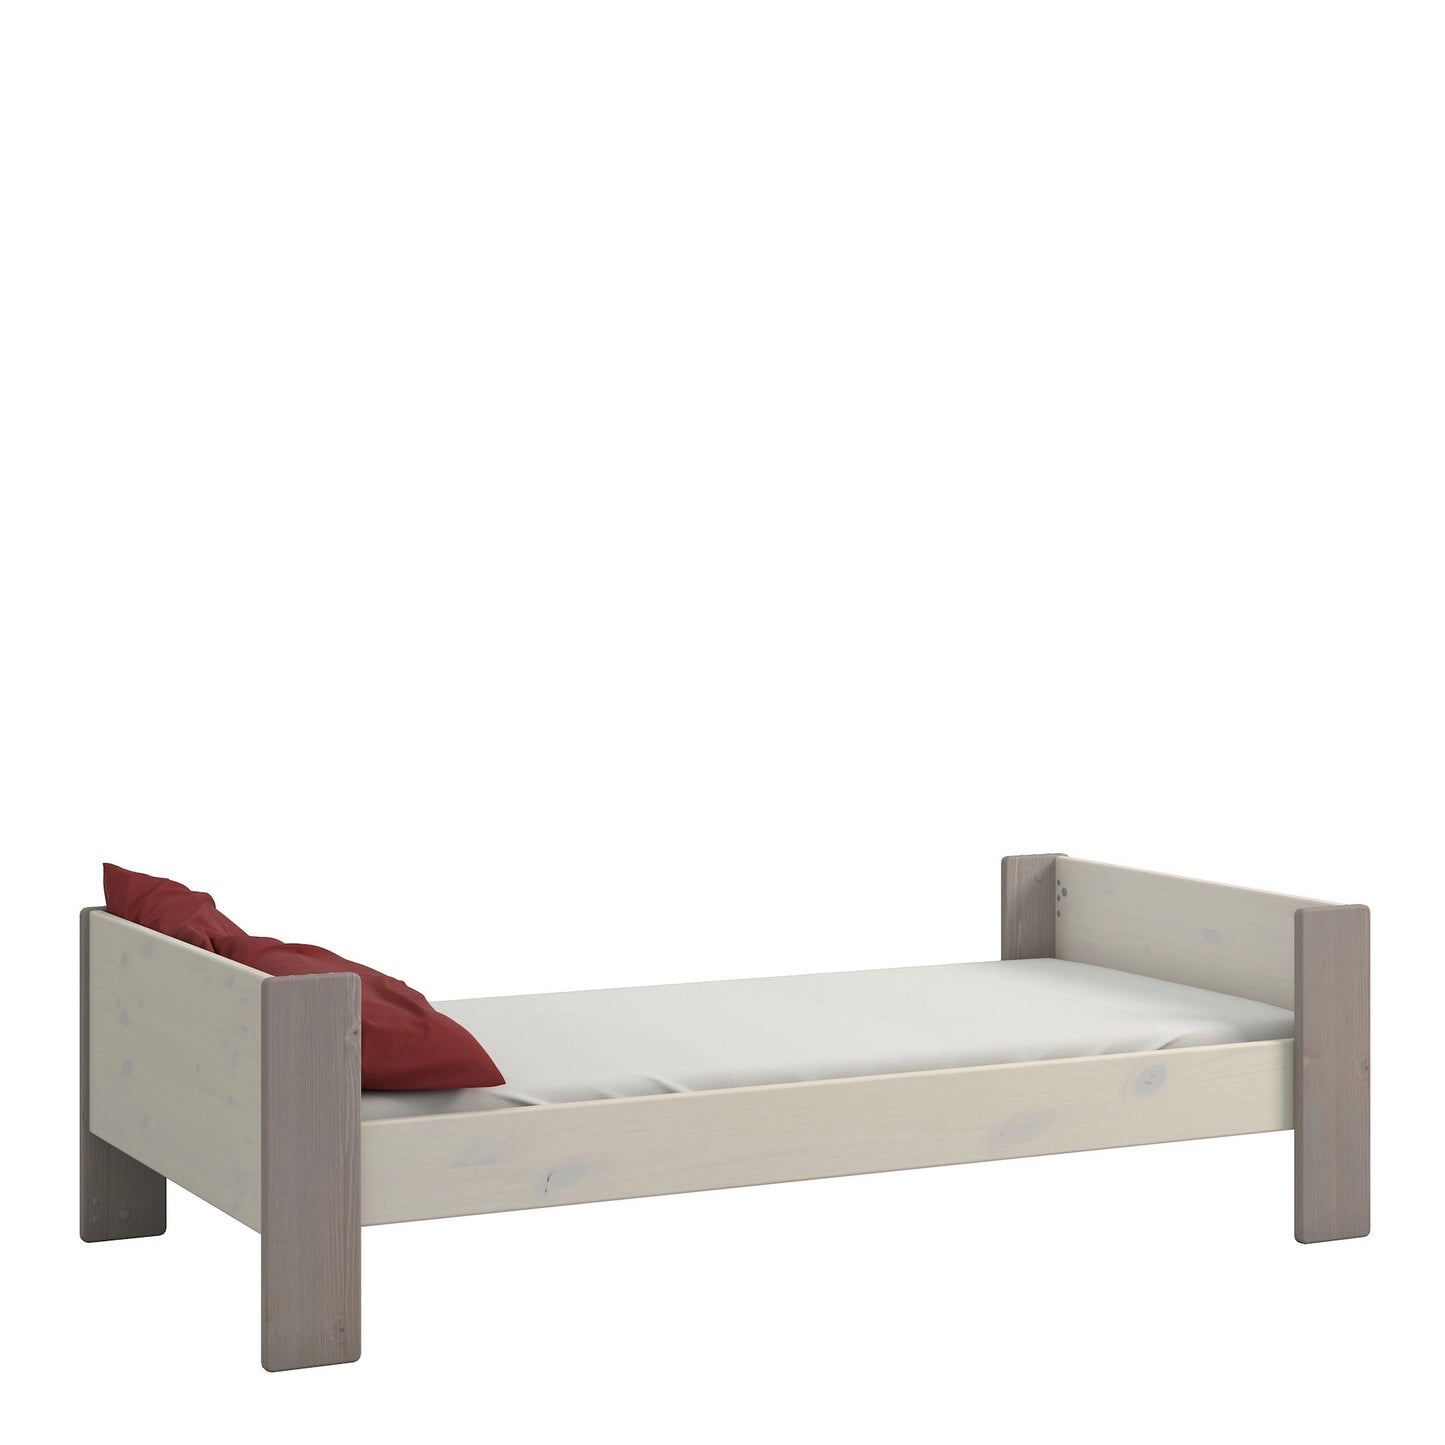 Furniture To Go Steens For Kids 3ft Single Bed in Whitewash Grey Brown Lacquered